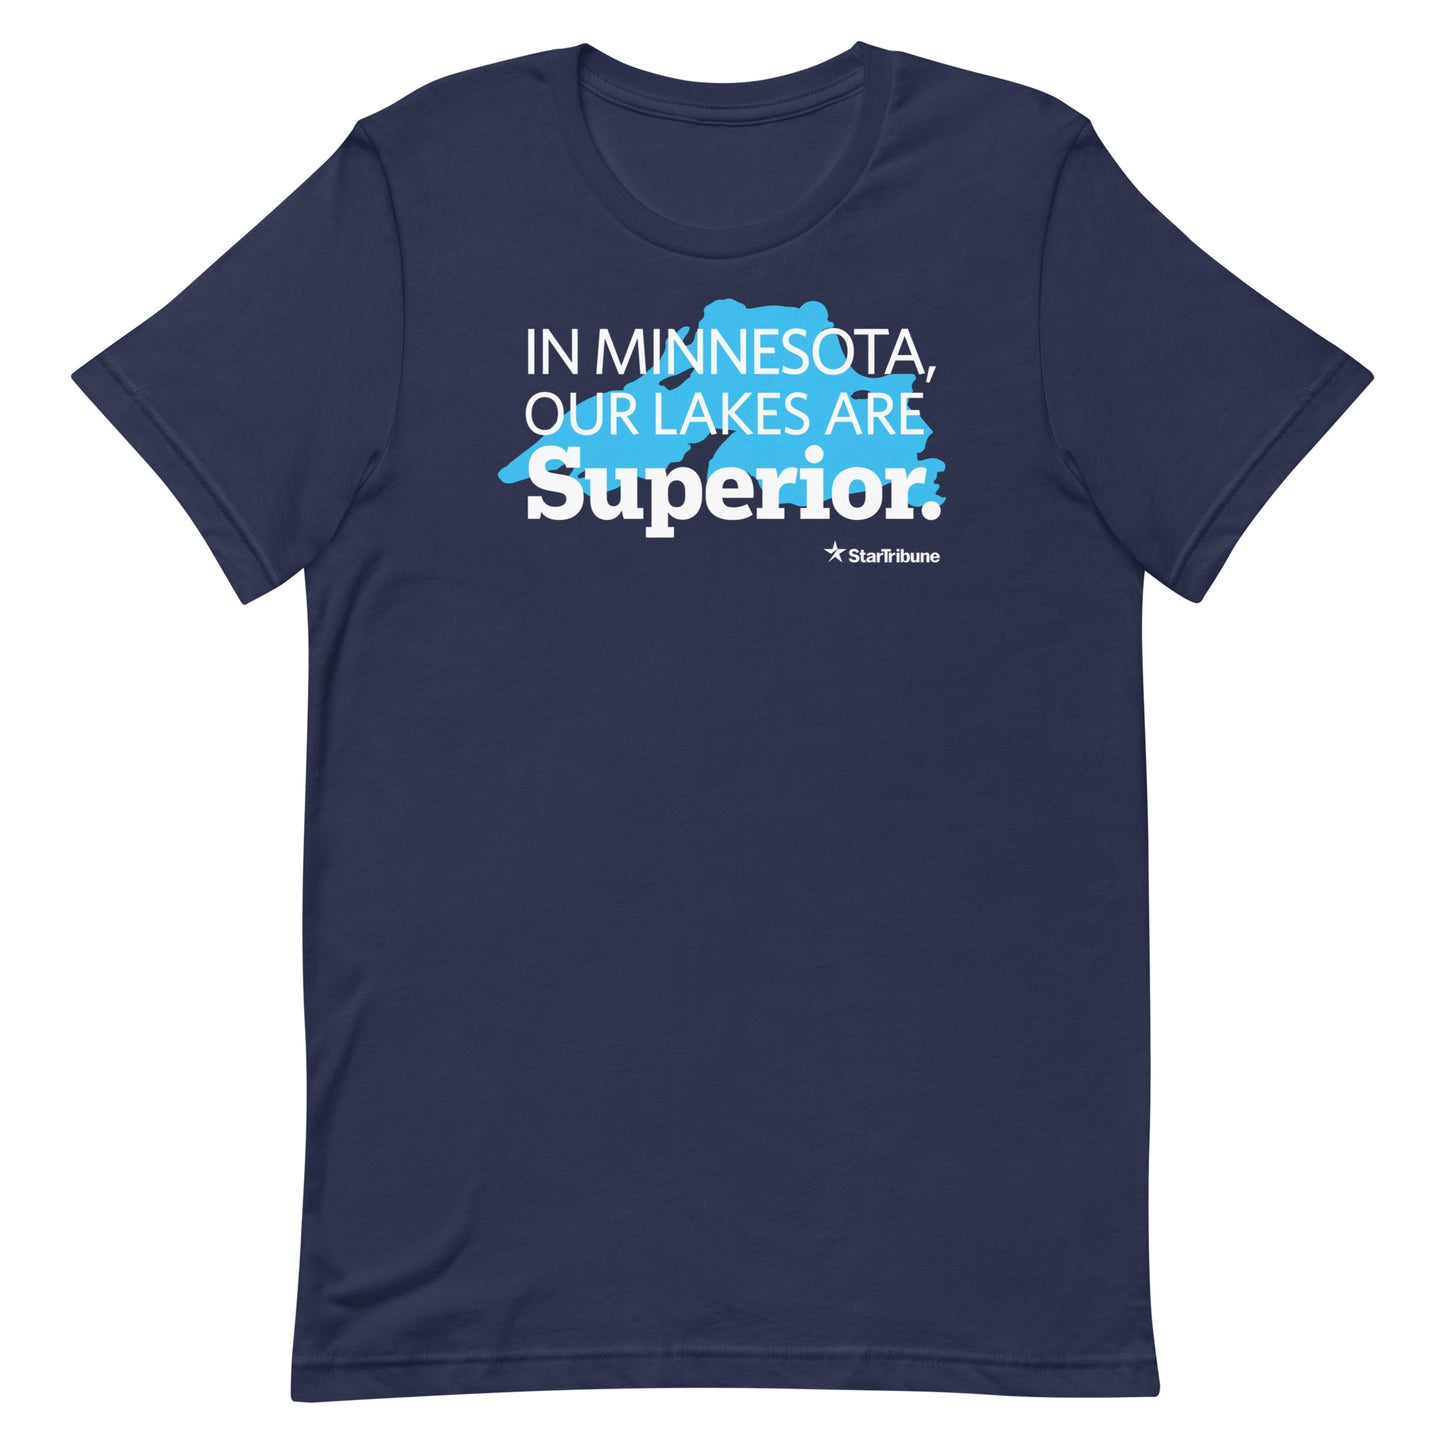 Our Lakes Are Superior T-shirt